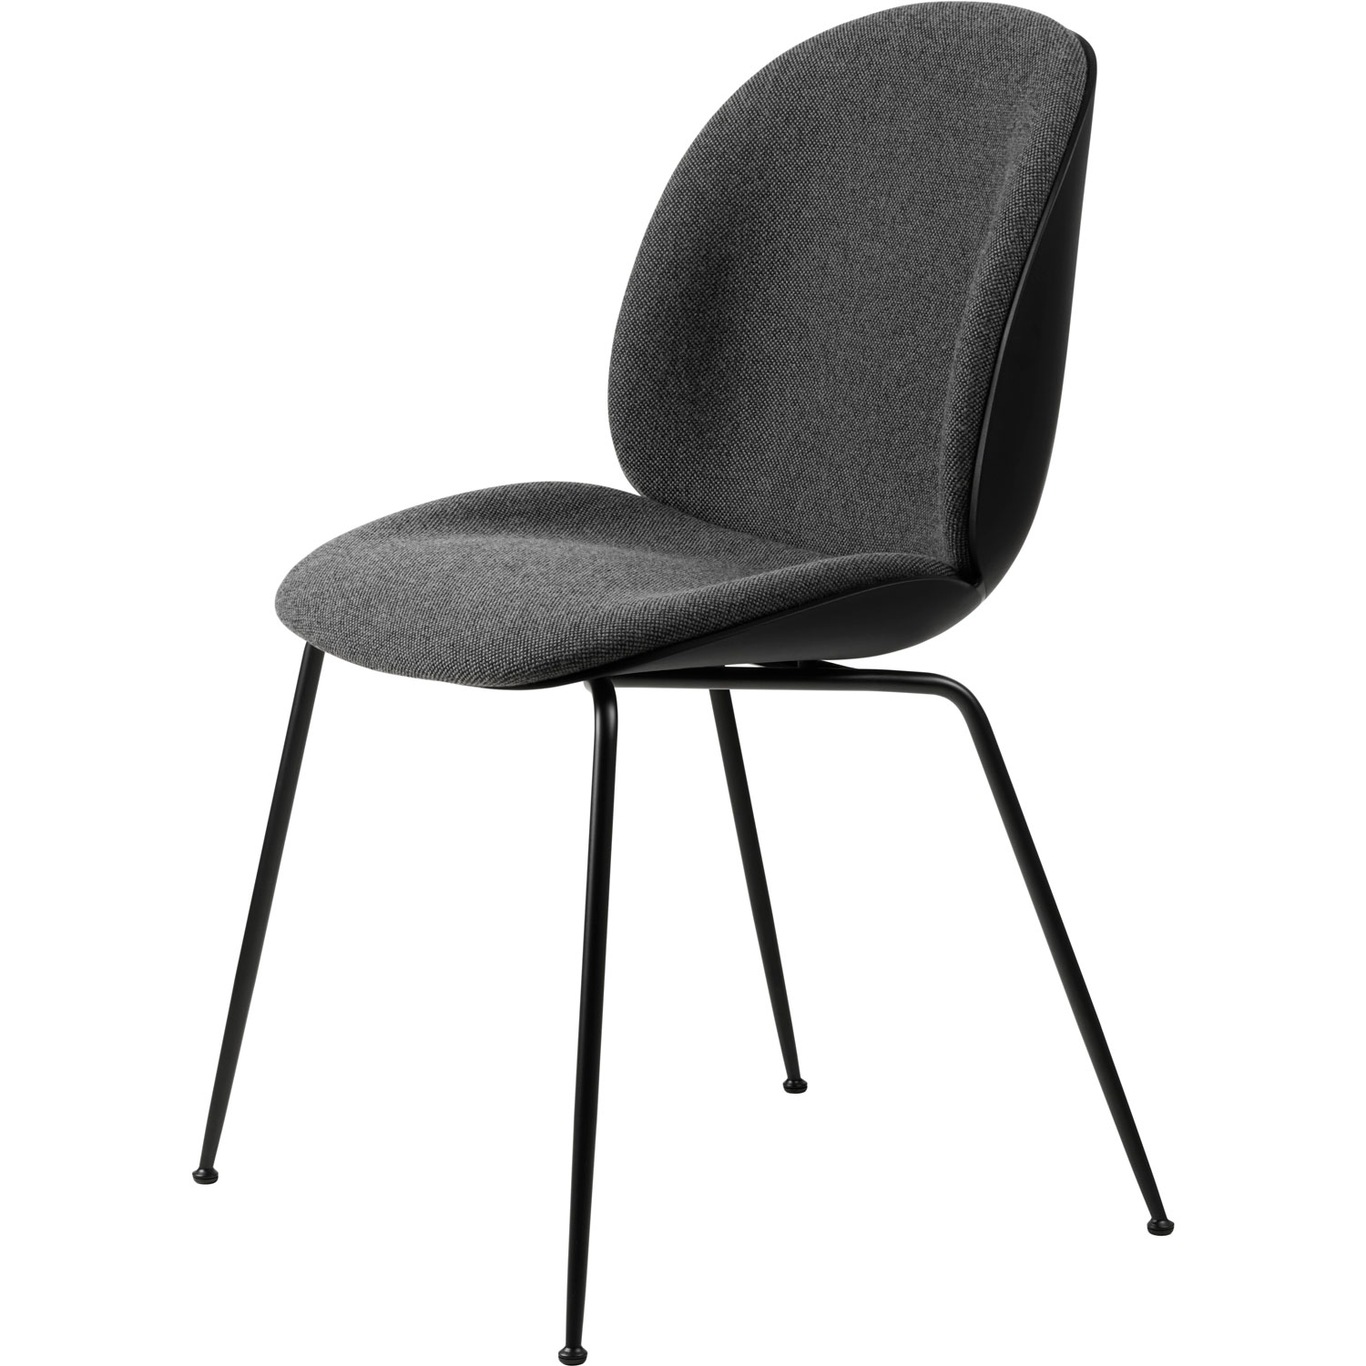 Beetle Chair Upholstered Front / Conical Base, Hallingdal 65 173